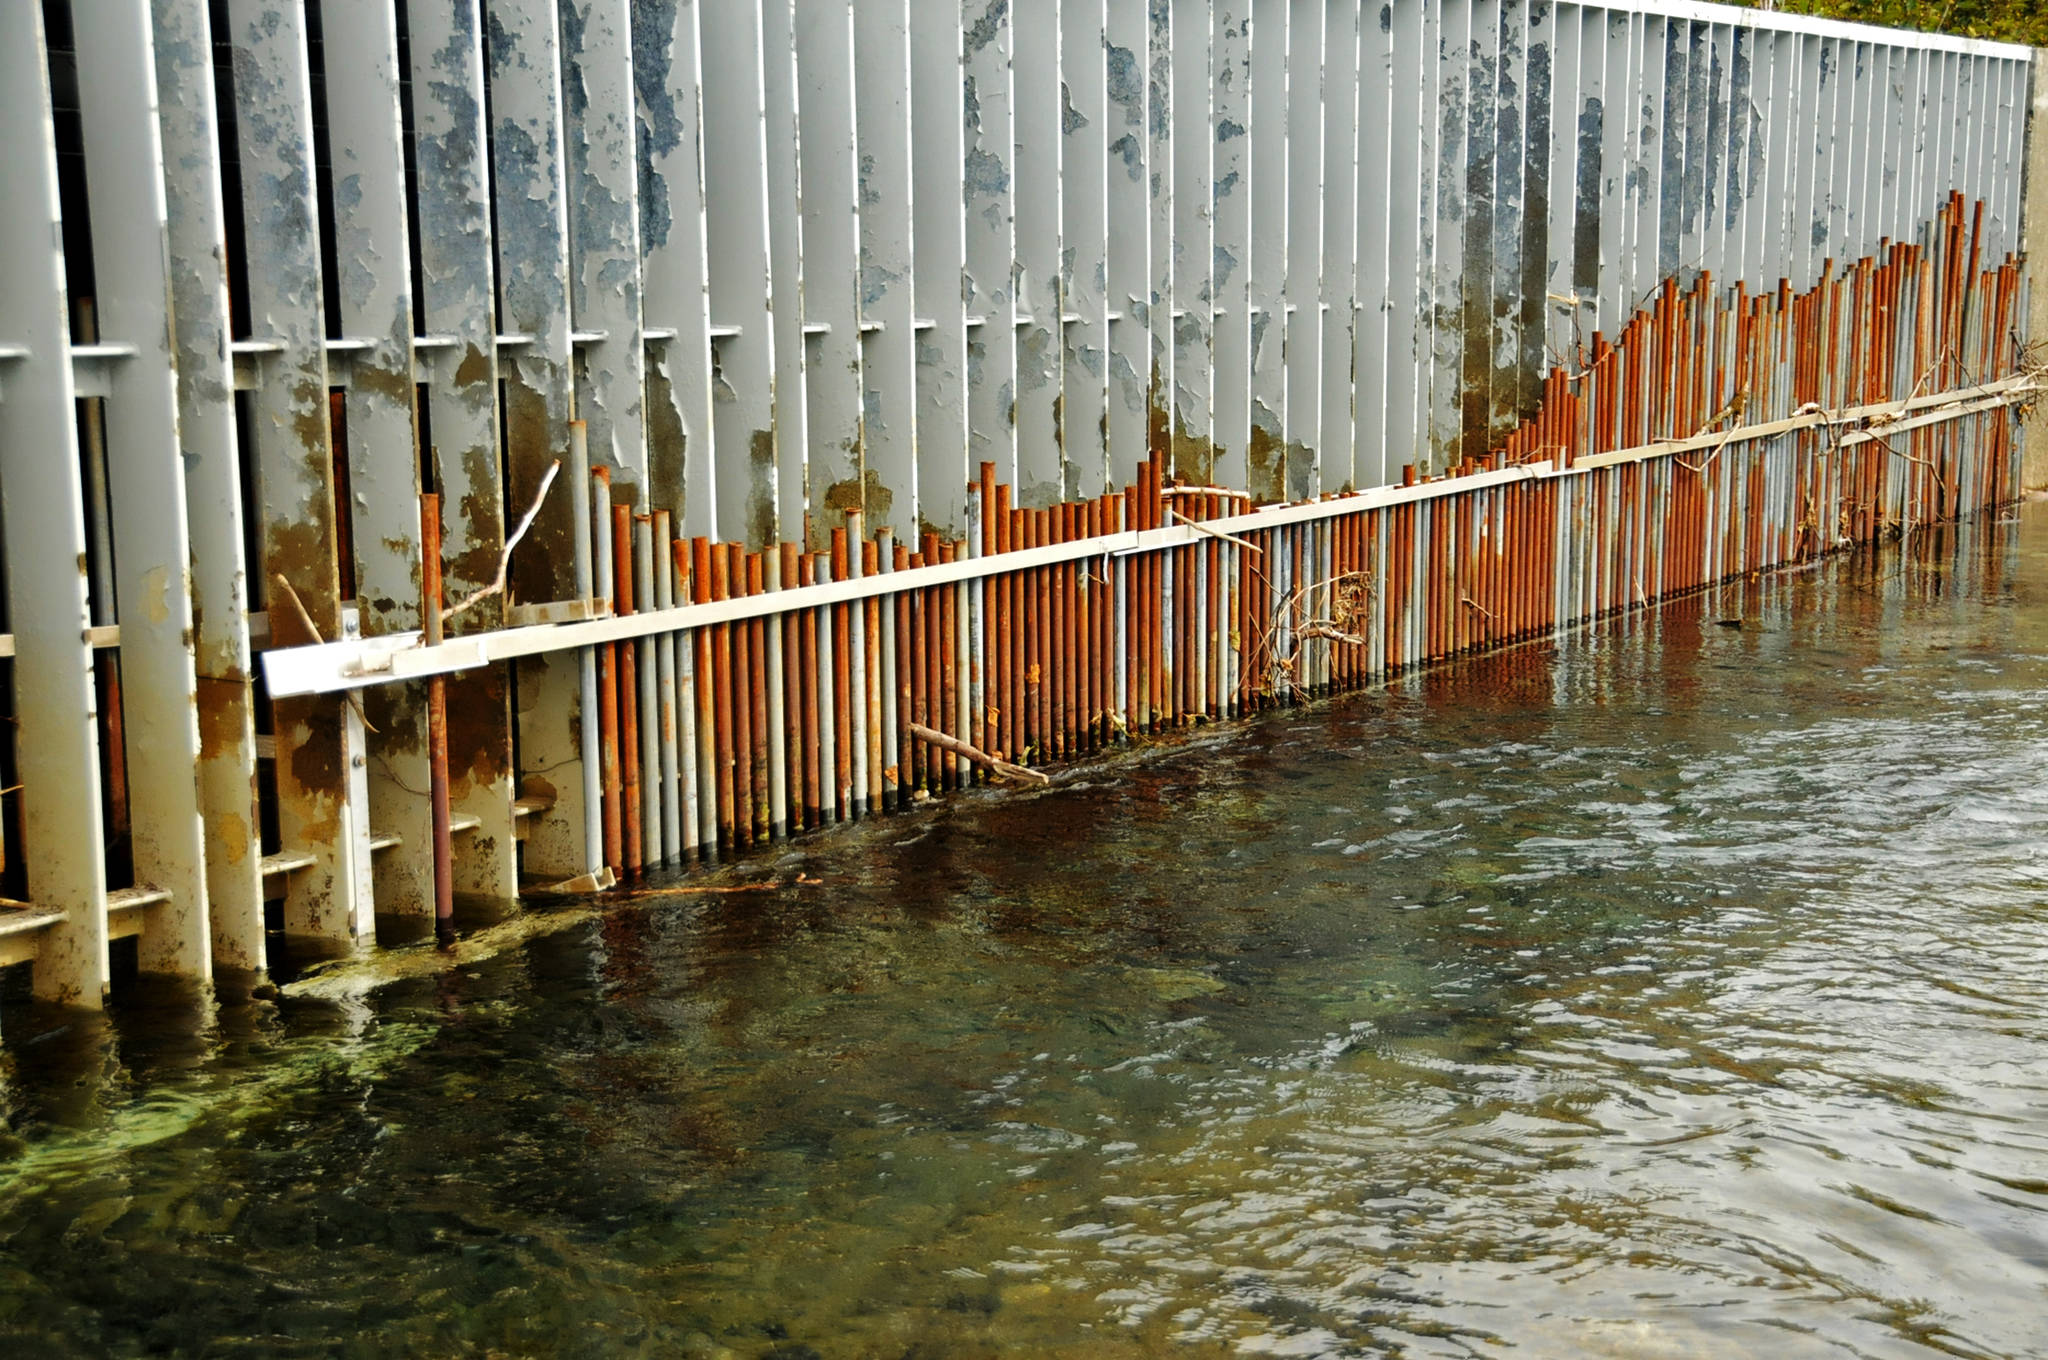 The weir at the top of Cook Inlet Aquaculture Association’s Paint River fish ladder, photographed Friday, Sept. 2, 2016 near the McNeil River Game Sanctuary, Alaska, screens fish into a small opening before allowing them to pass into the upper part of the Paint River. CIAA operates the fish ladder to allow salmon to pass into the upper reaches of the remote river system to spawn. (Photo by Elizabeth Earl/Peninsula Clarion, file)